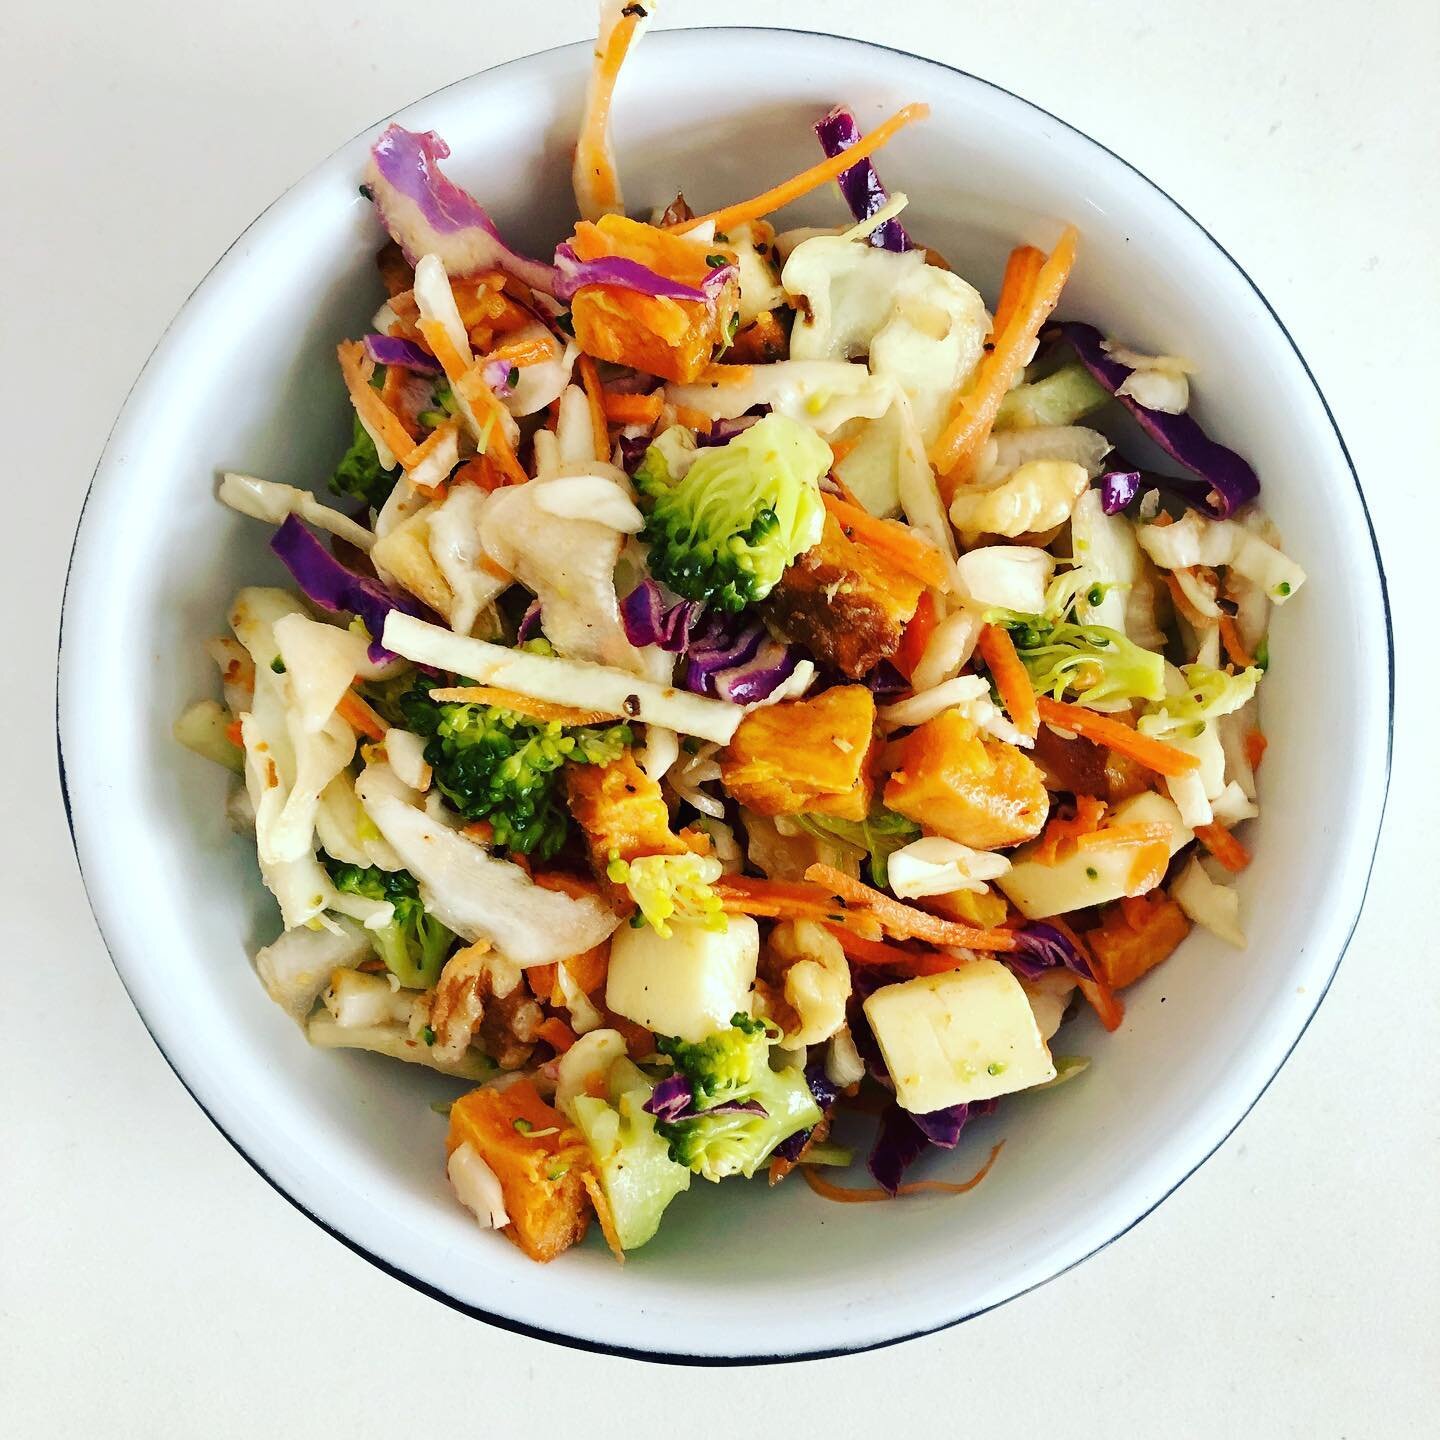 LOW FODMAP AND PORTIONS. This salad has cabbage, carrots, walnuts, cheddar, broccoli florets, sweet potato, olive oil, and red wine vinegar. It&rsquo;s low FODMAP since each food is around the threshold that most people can tolerate. 

This is probab